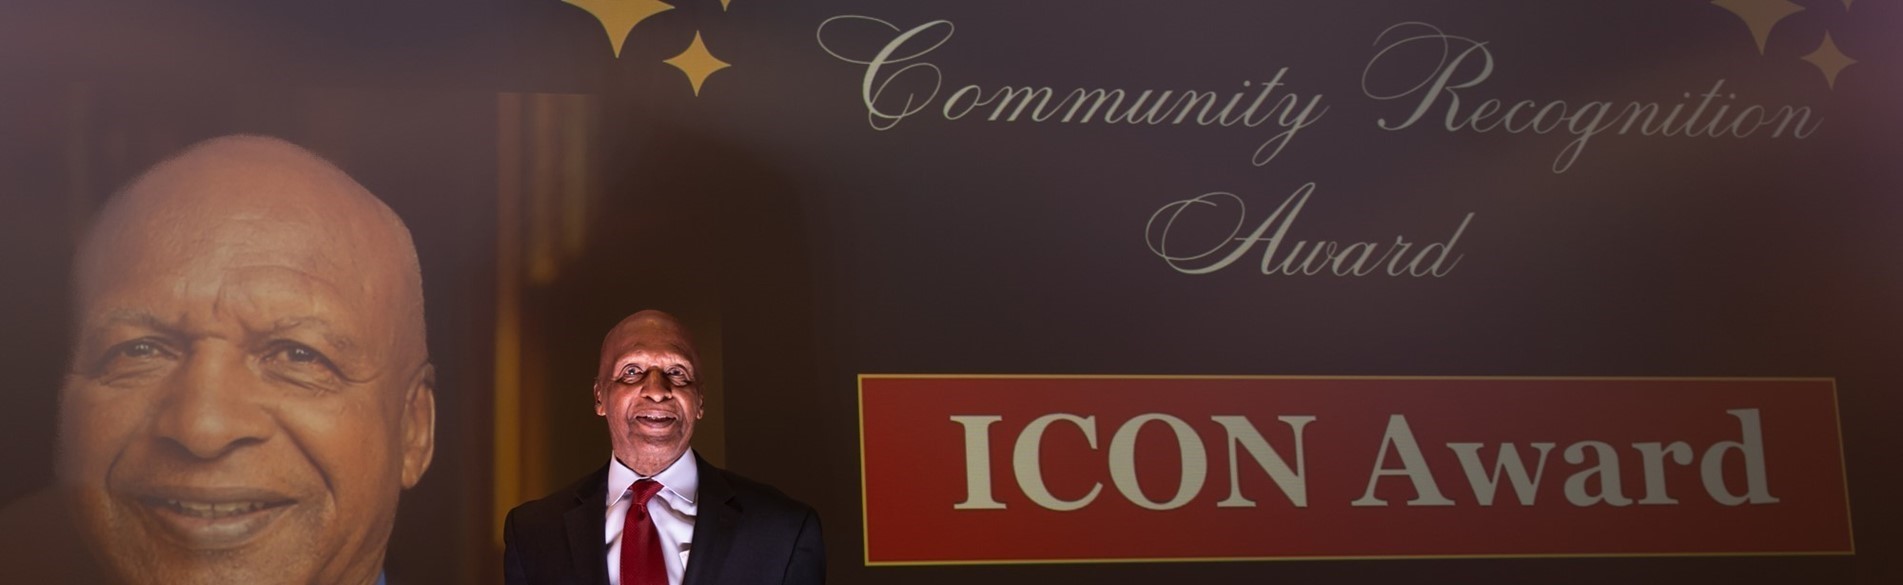 Secretary of State, Jesse White receives the ICON award during first annual CRA event.